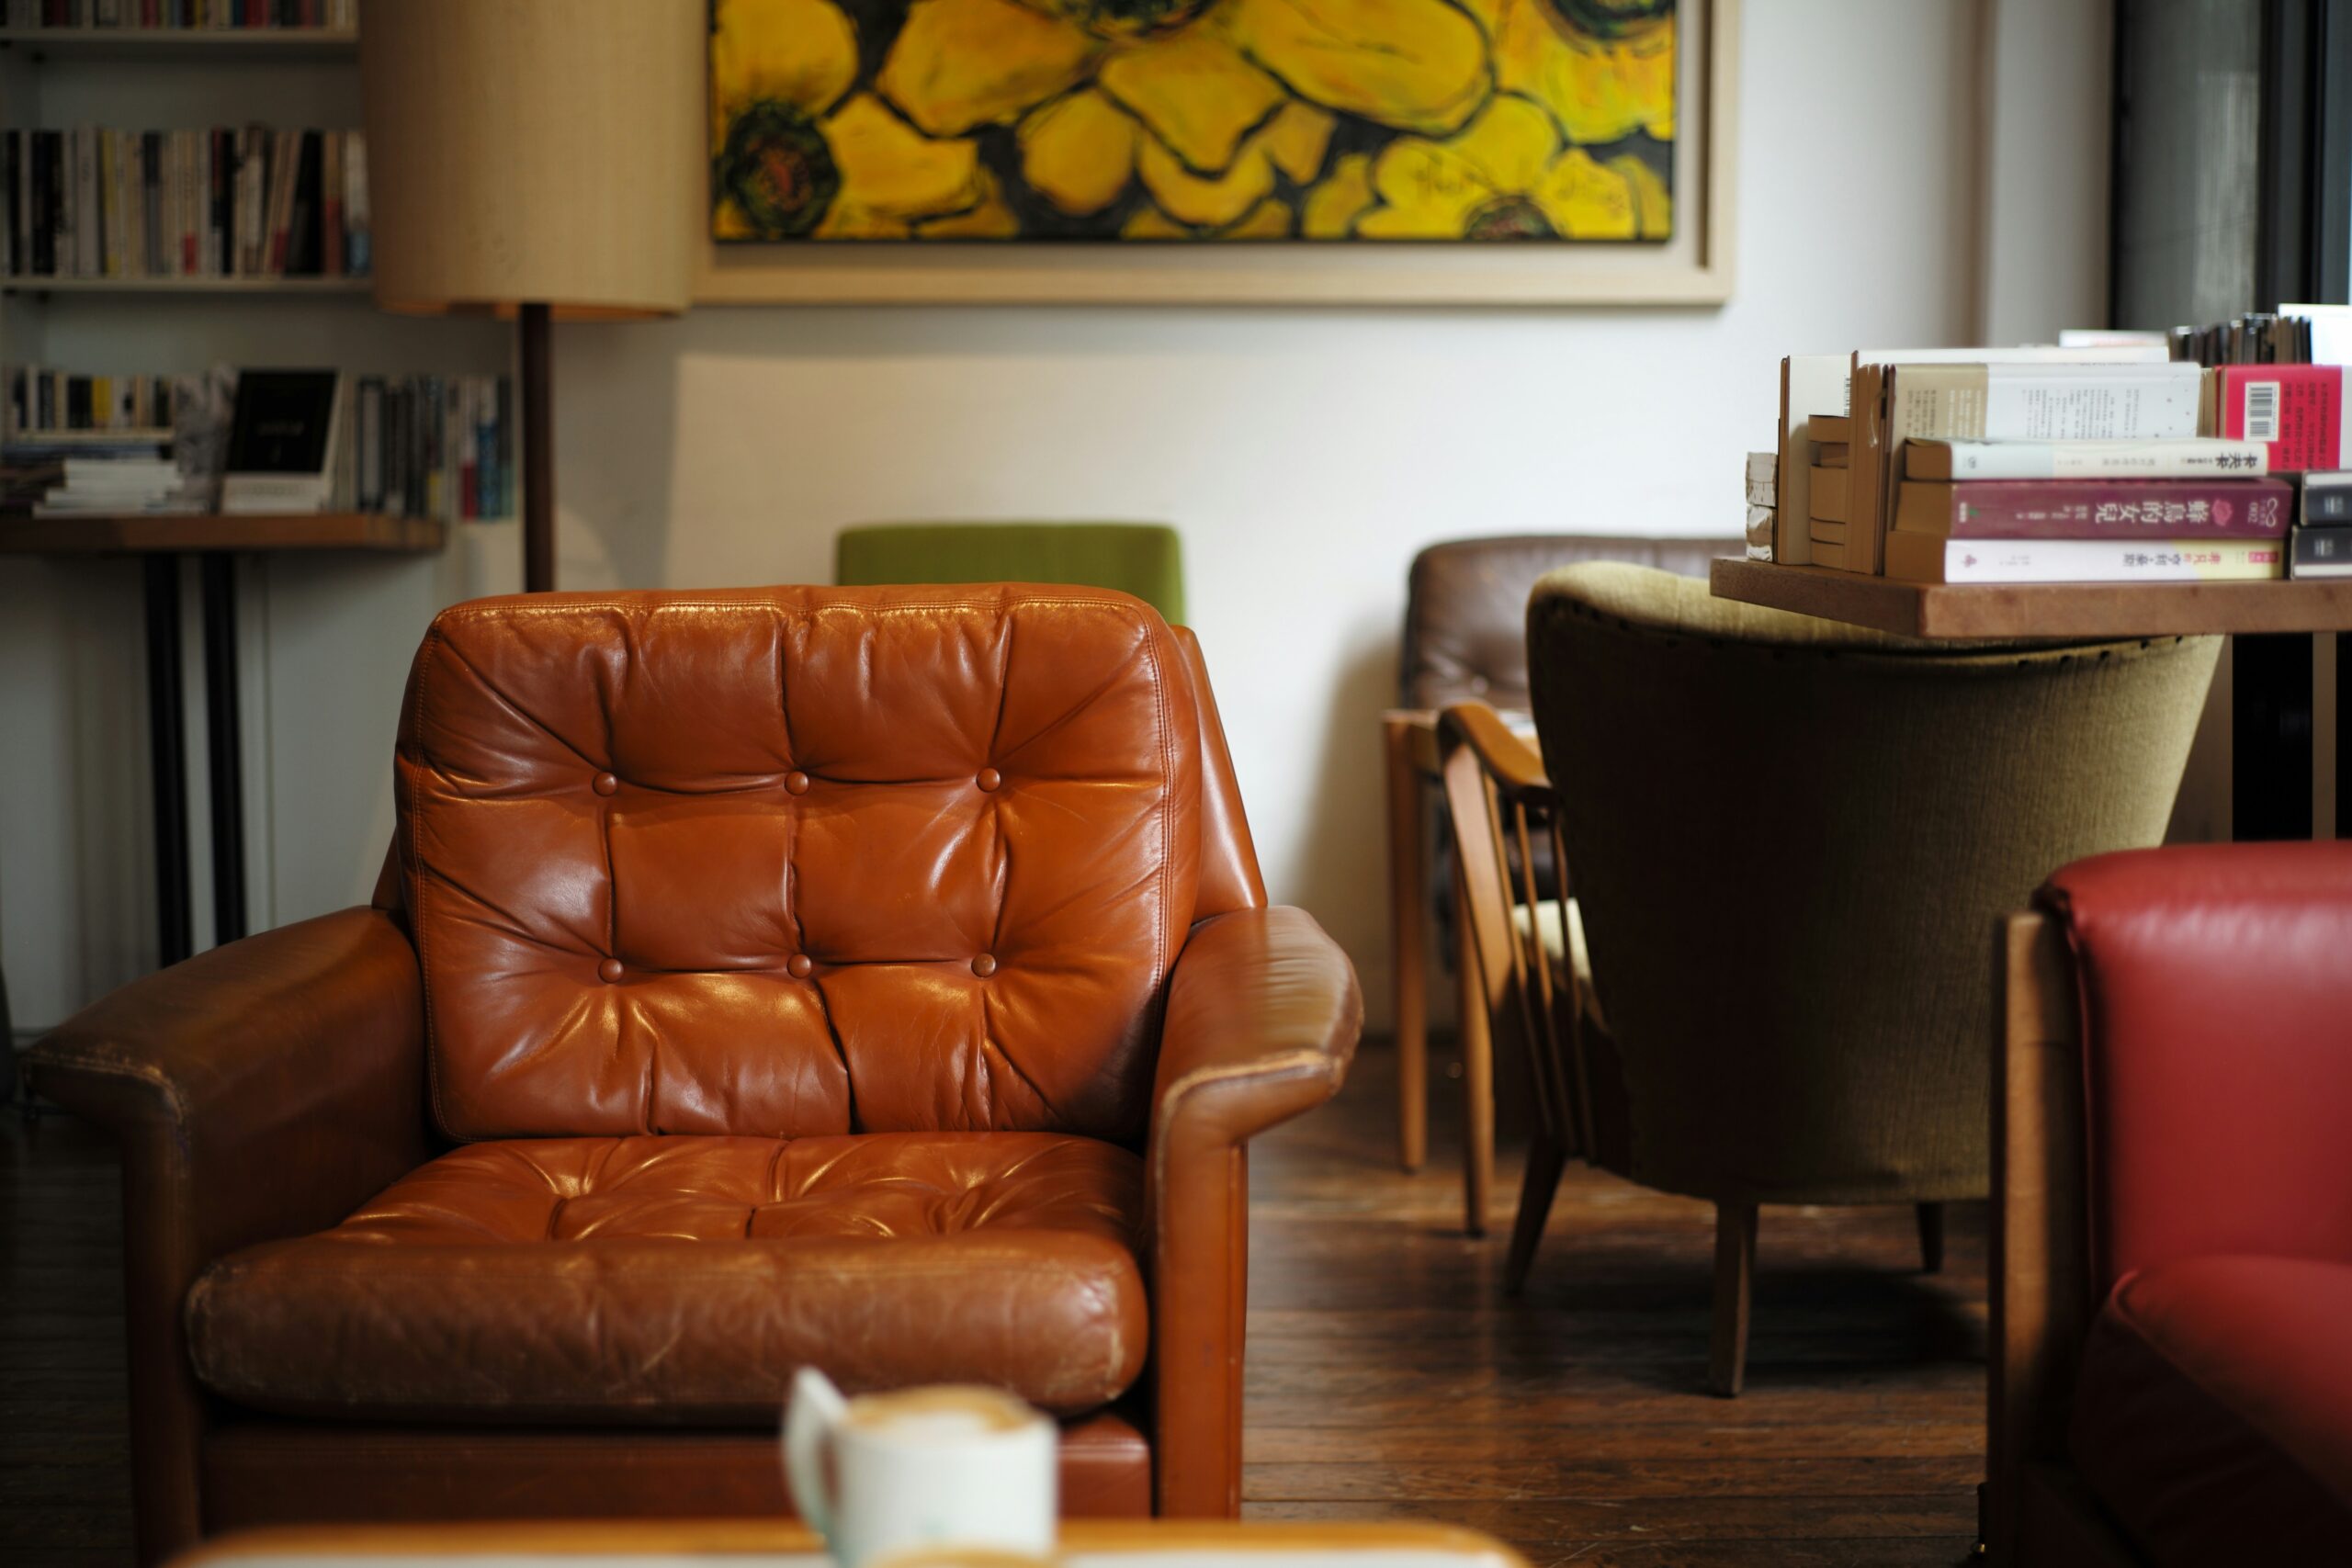 Get rid of odd stains like gum or ink by learning how to clean your leather couch. Pictured: A leather chair in a room